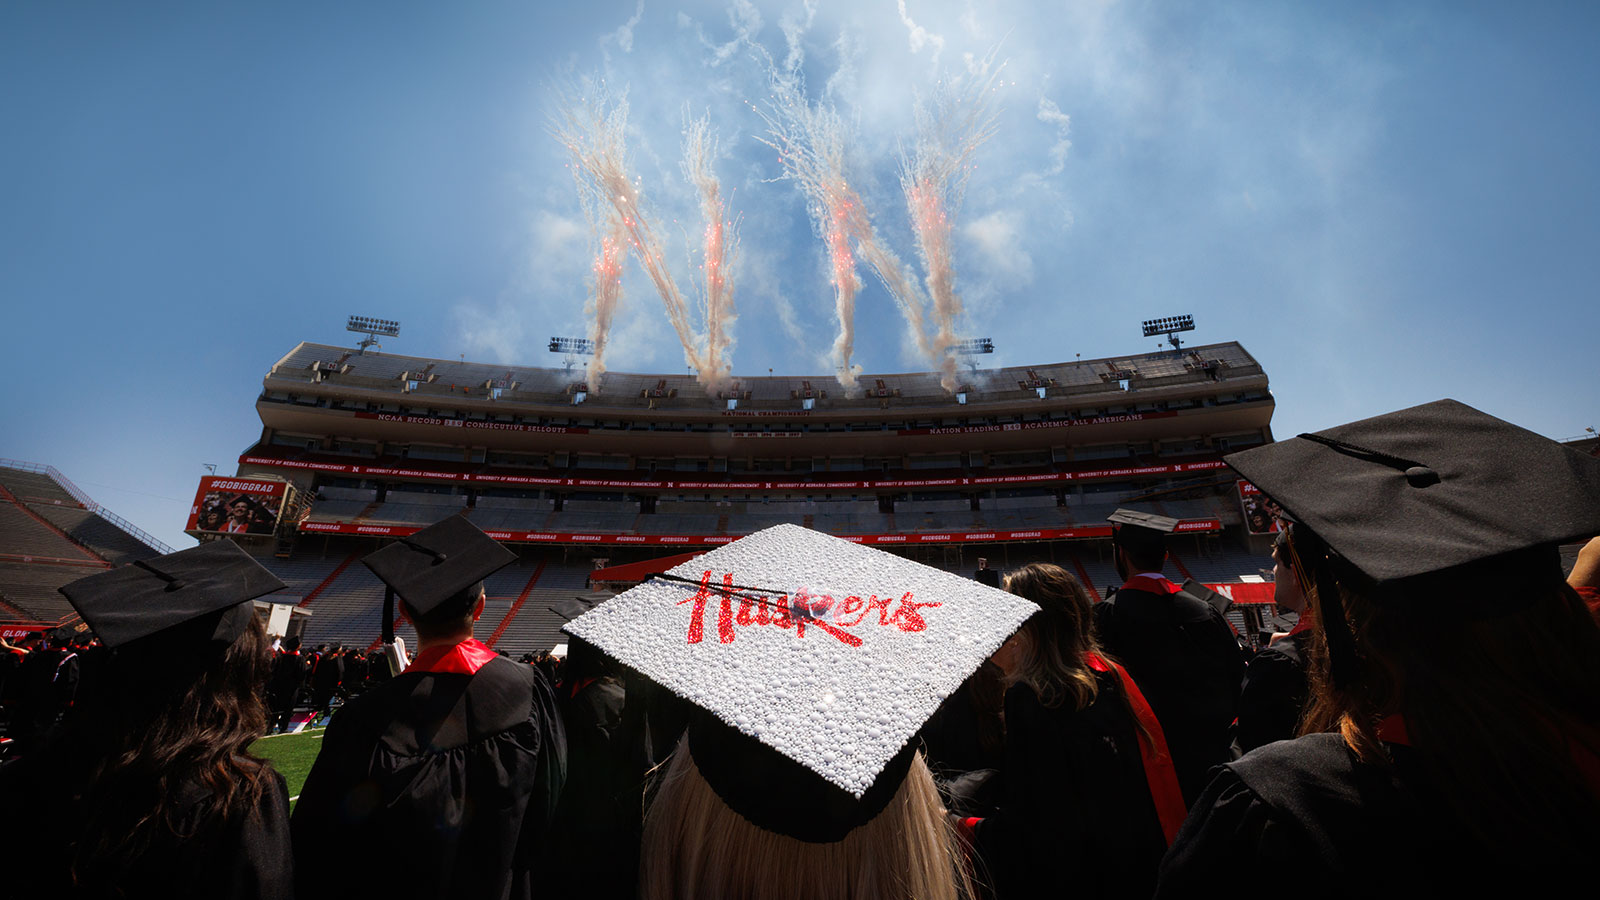 stadium on graduation day with fireworks and a student's cap that says Huskers on it